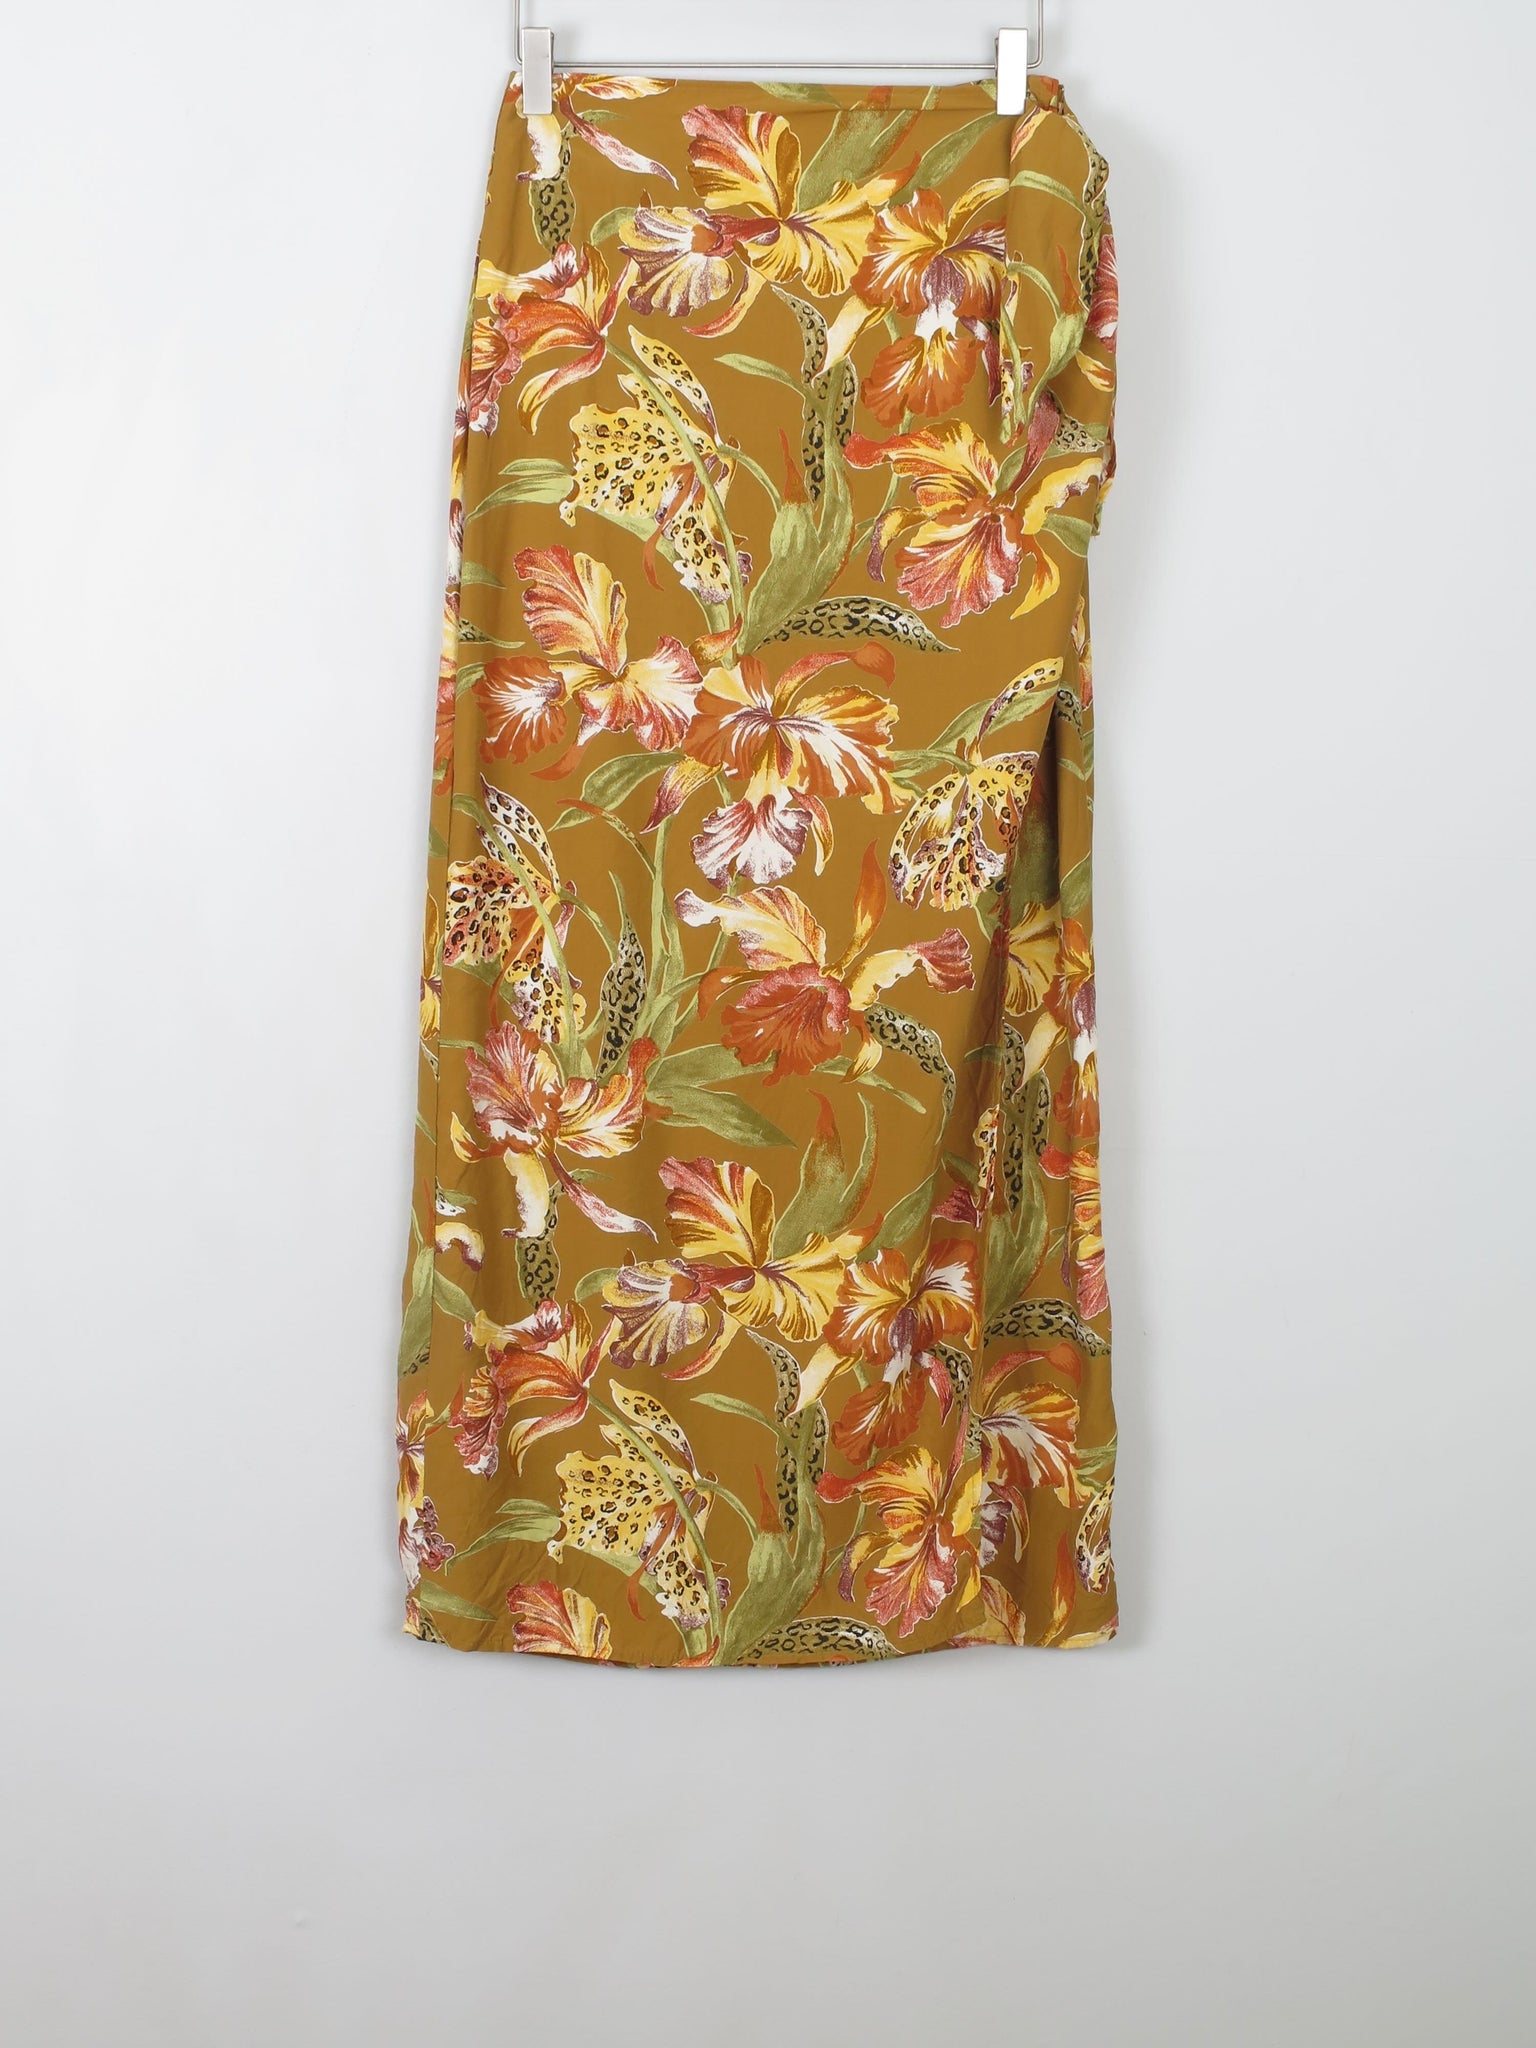 Printed Vintage Wrap Over Style Skirt 26" 6/8 XS - The Harlequin